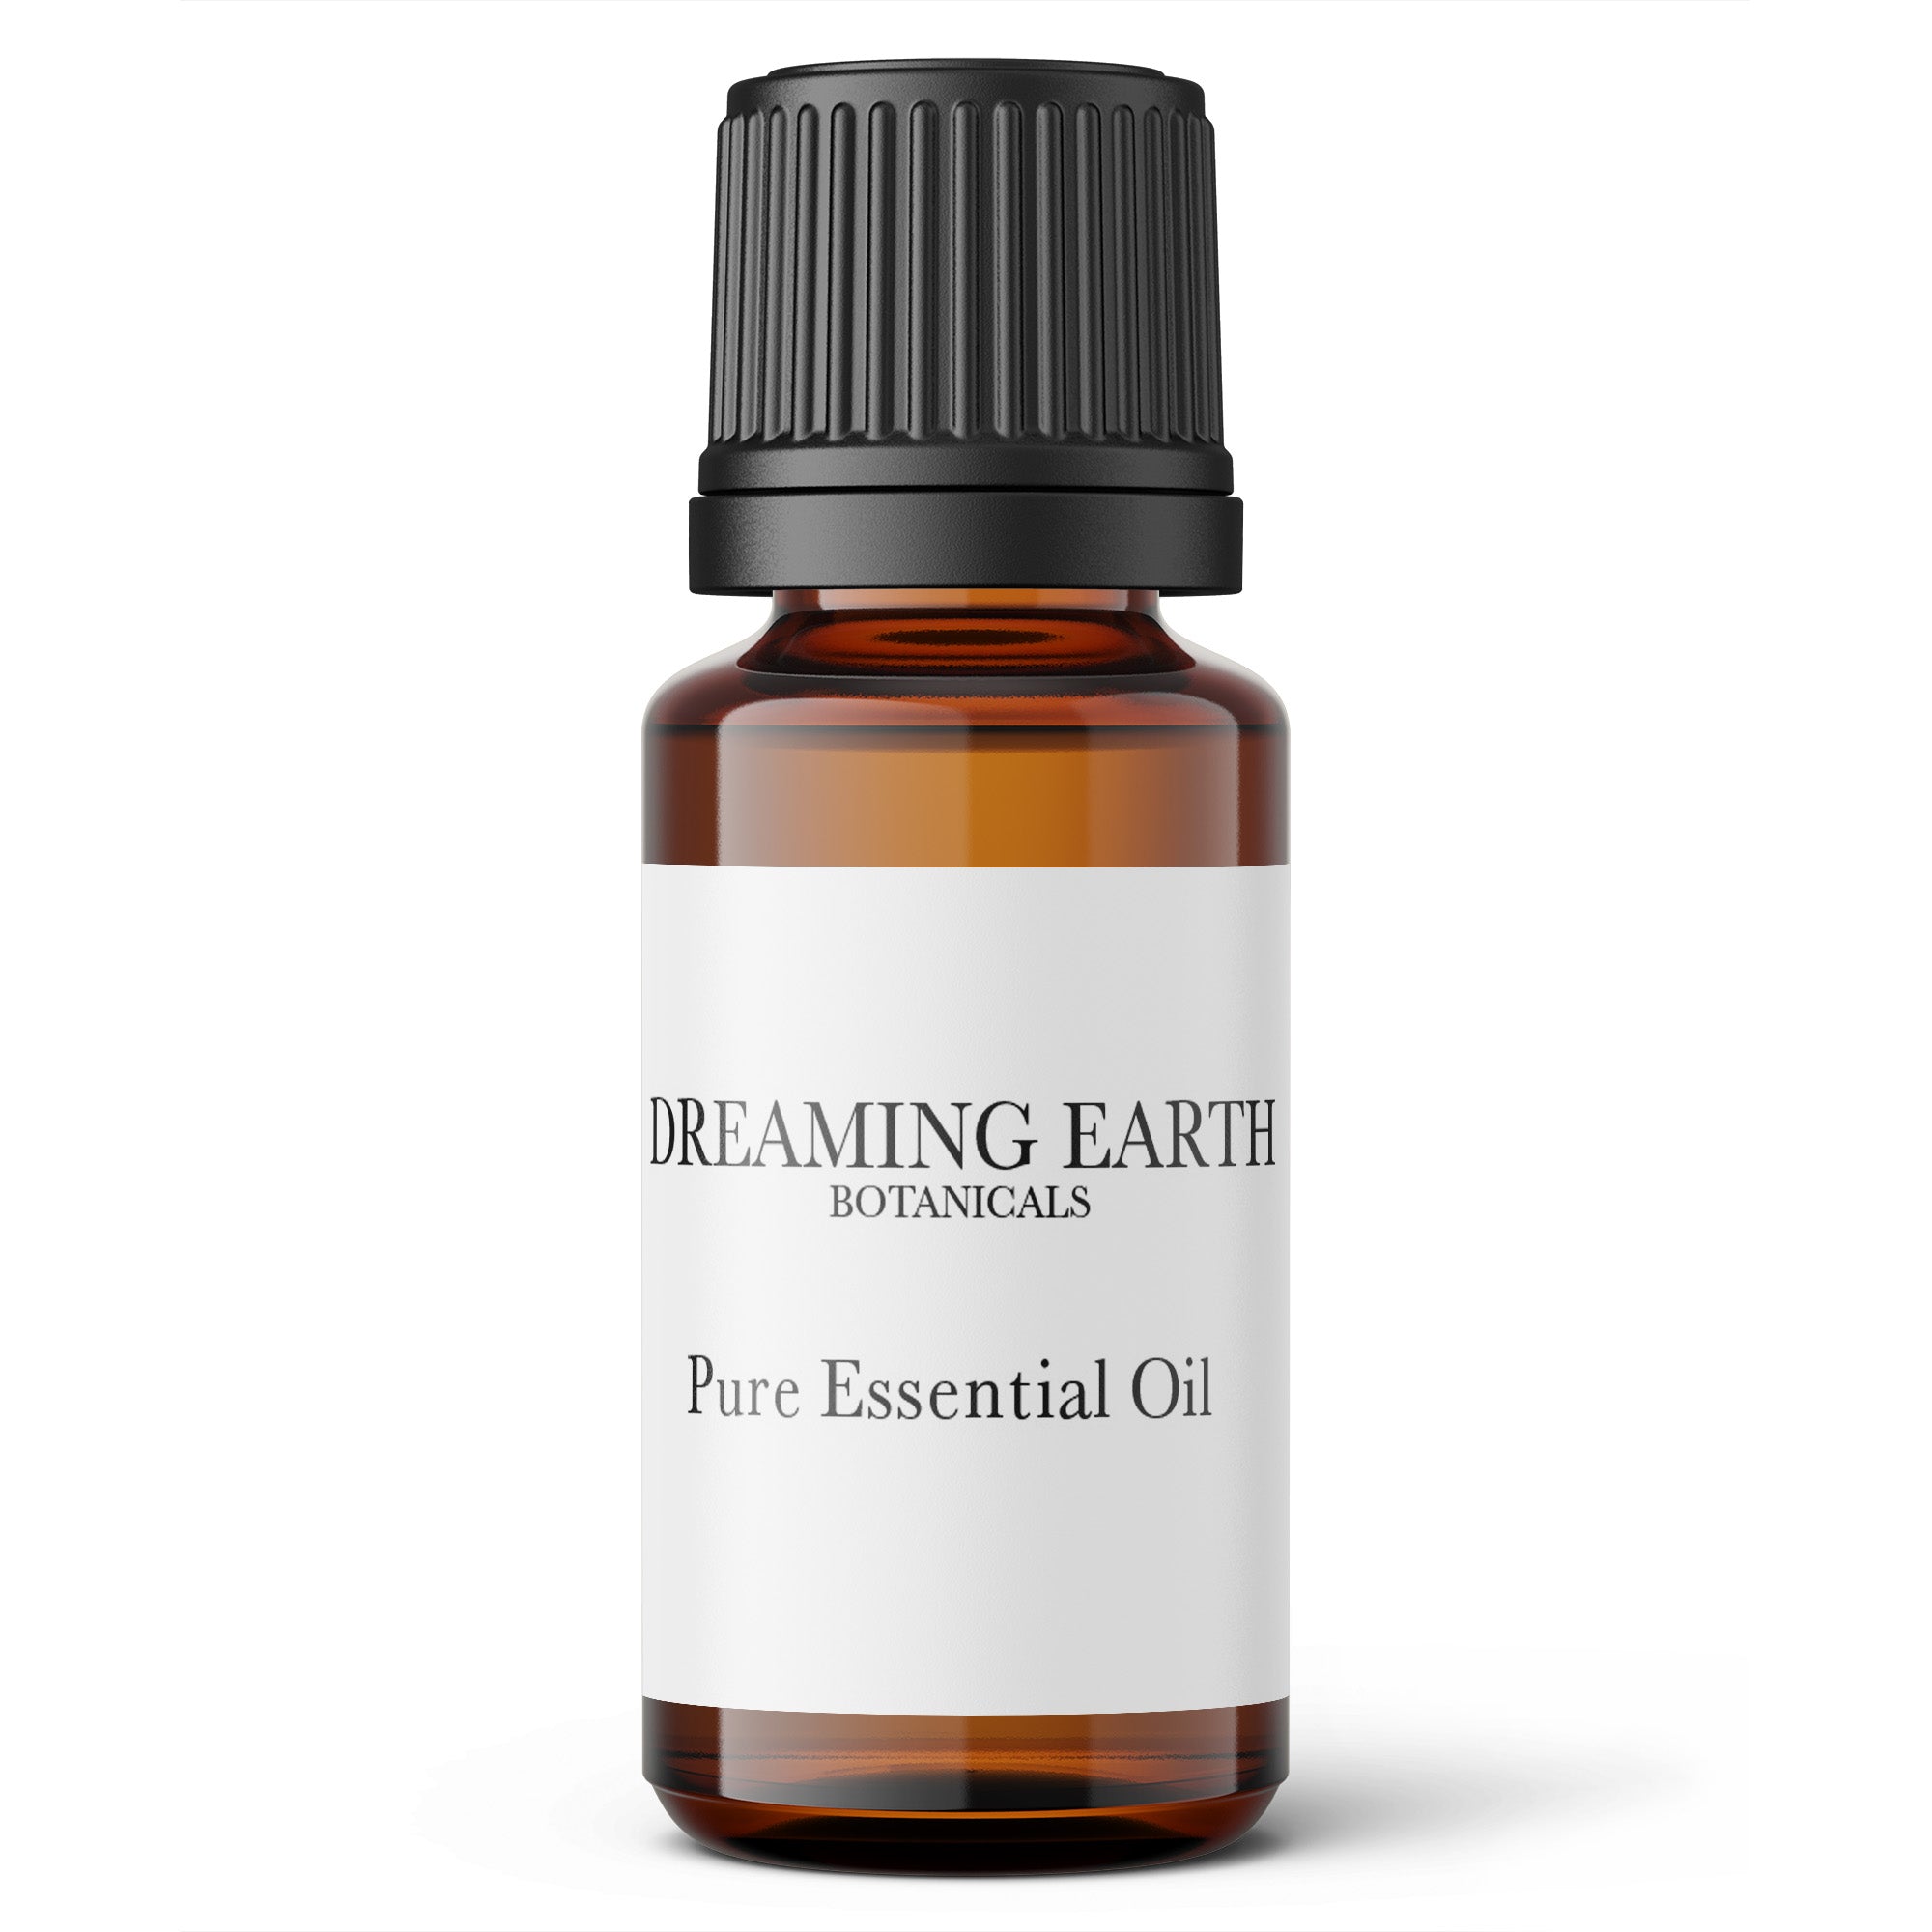 Load image into Gallery viewer, Frankincense Essential Oil - Dreaming Earth Inc
